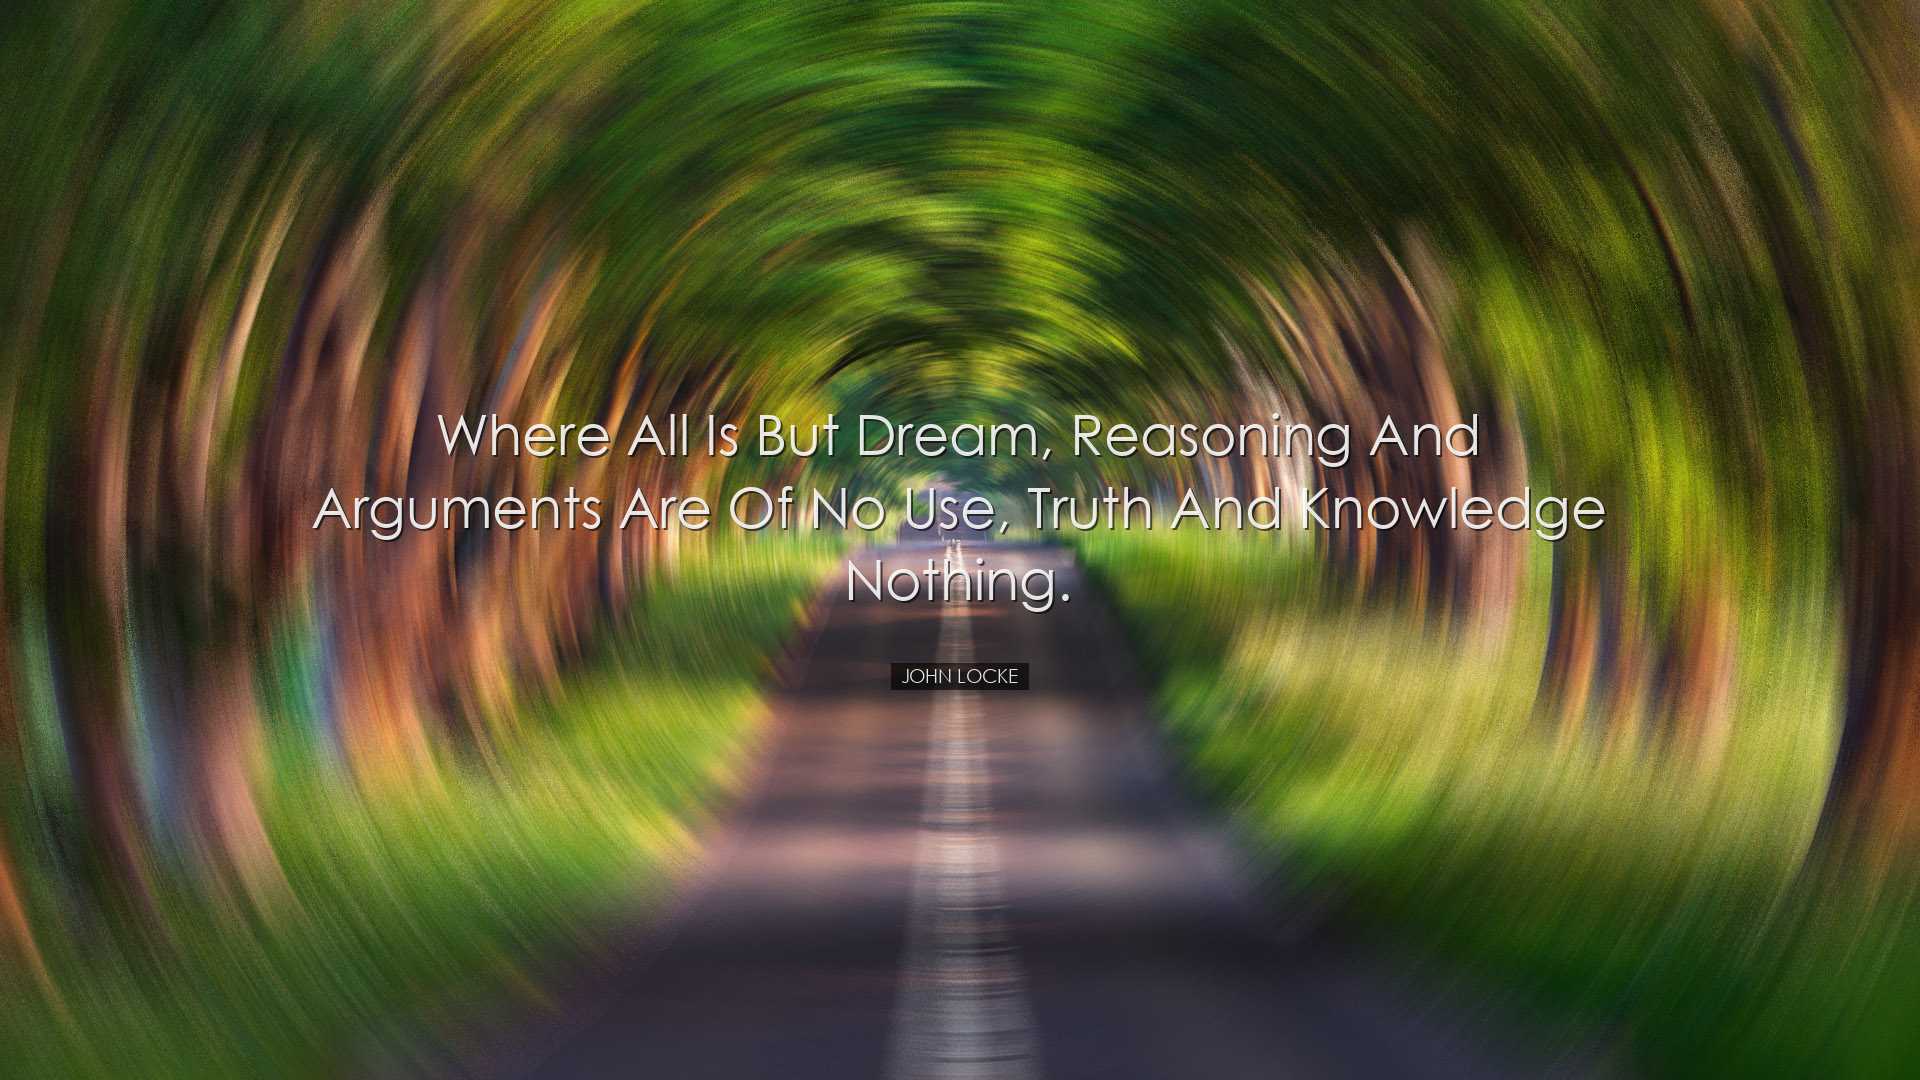 Where all is but dream, reasoning and arguments are of no use, tru